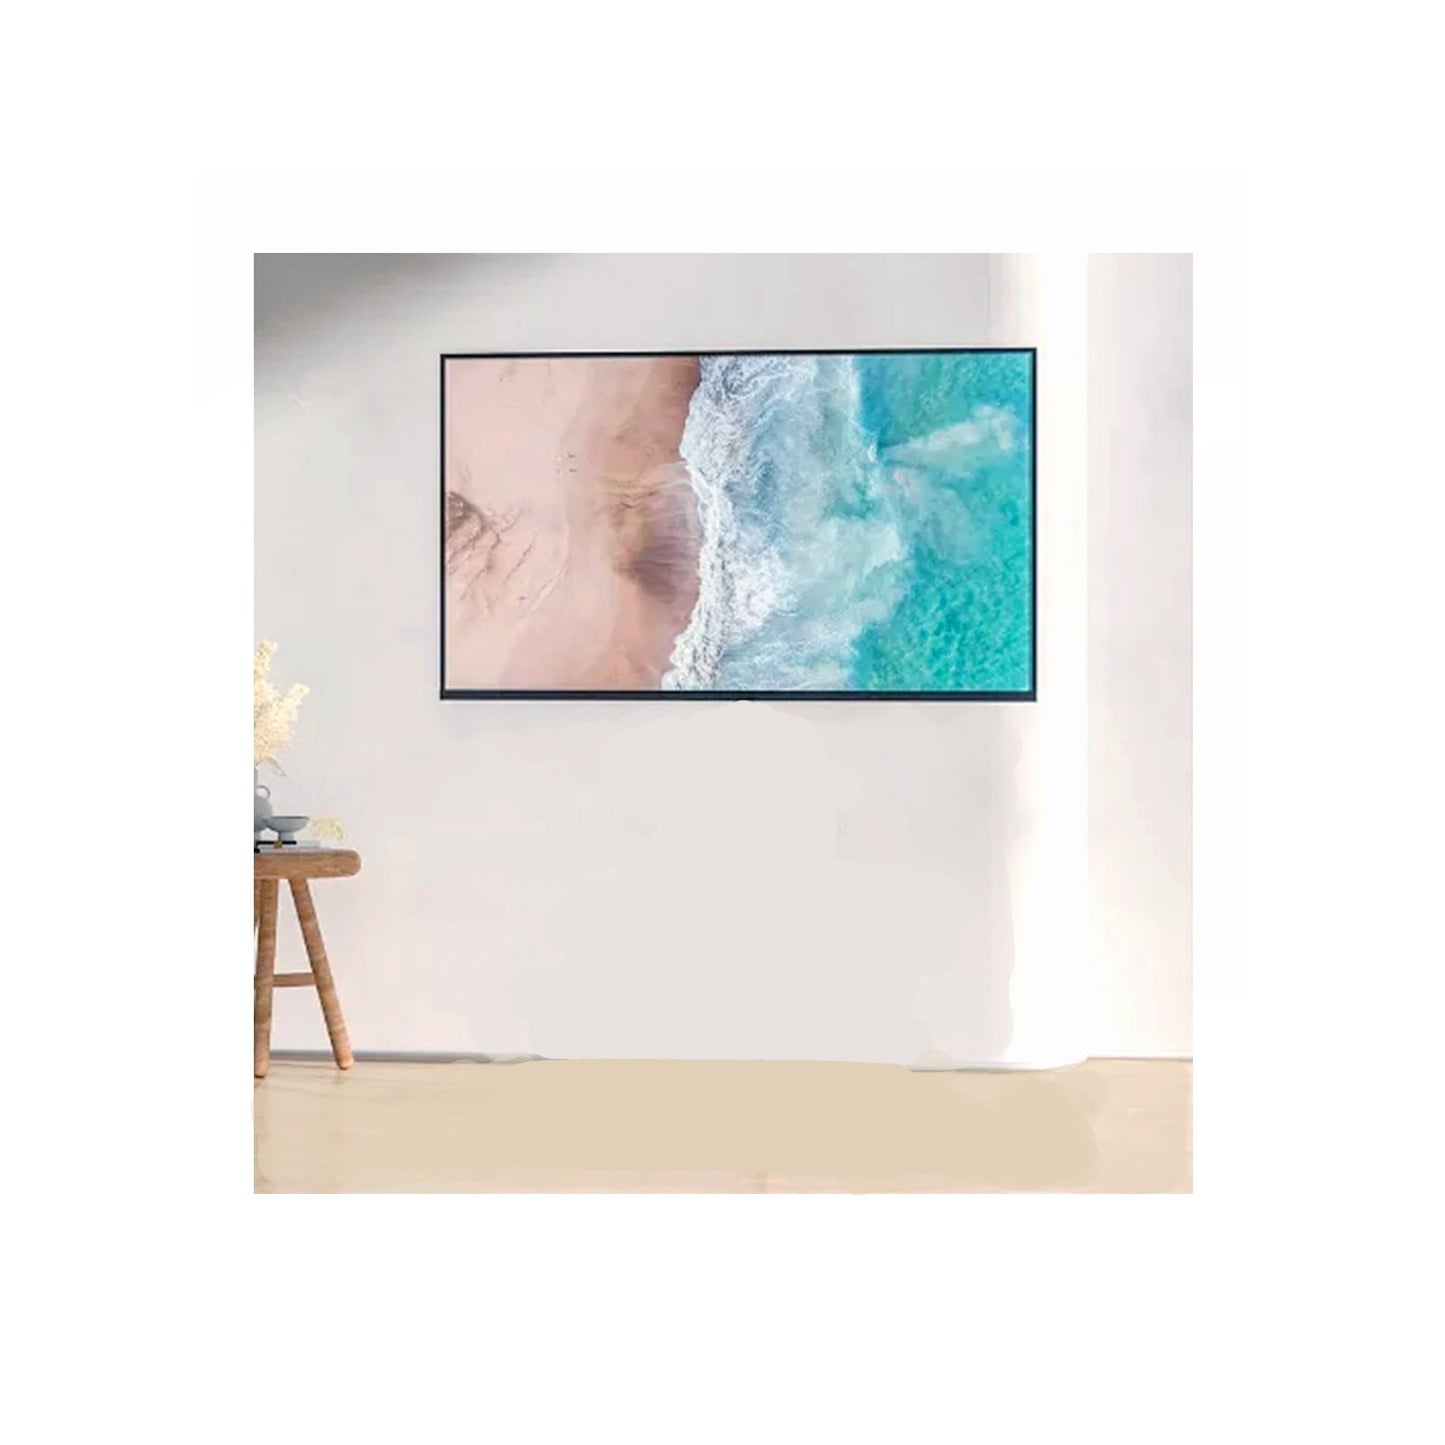 80" Indoor HD Full Colour COB All-in-one LED Dispaly